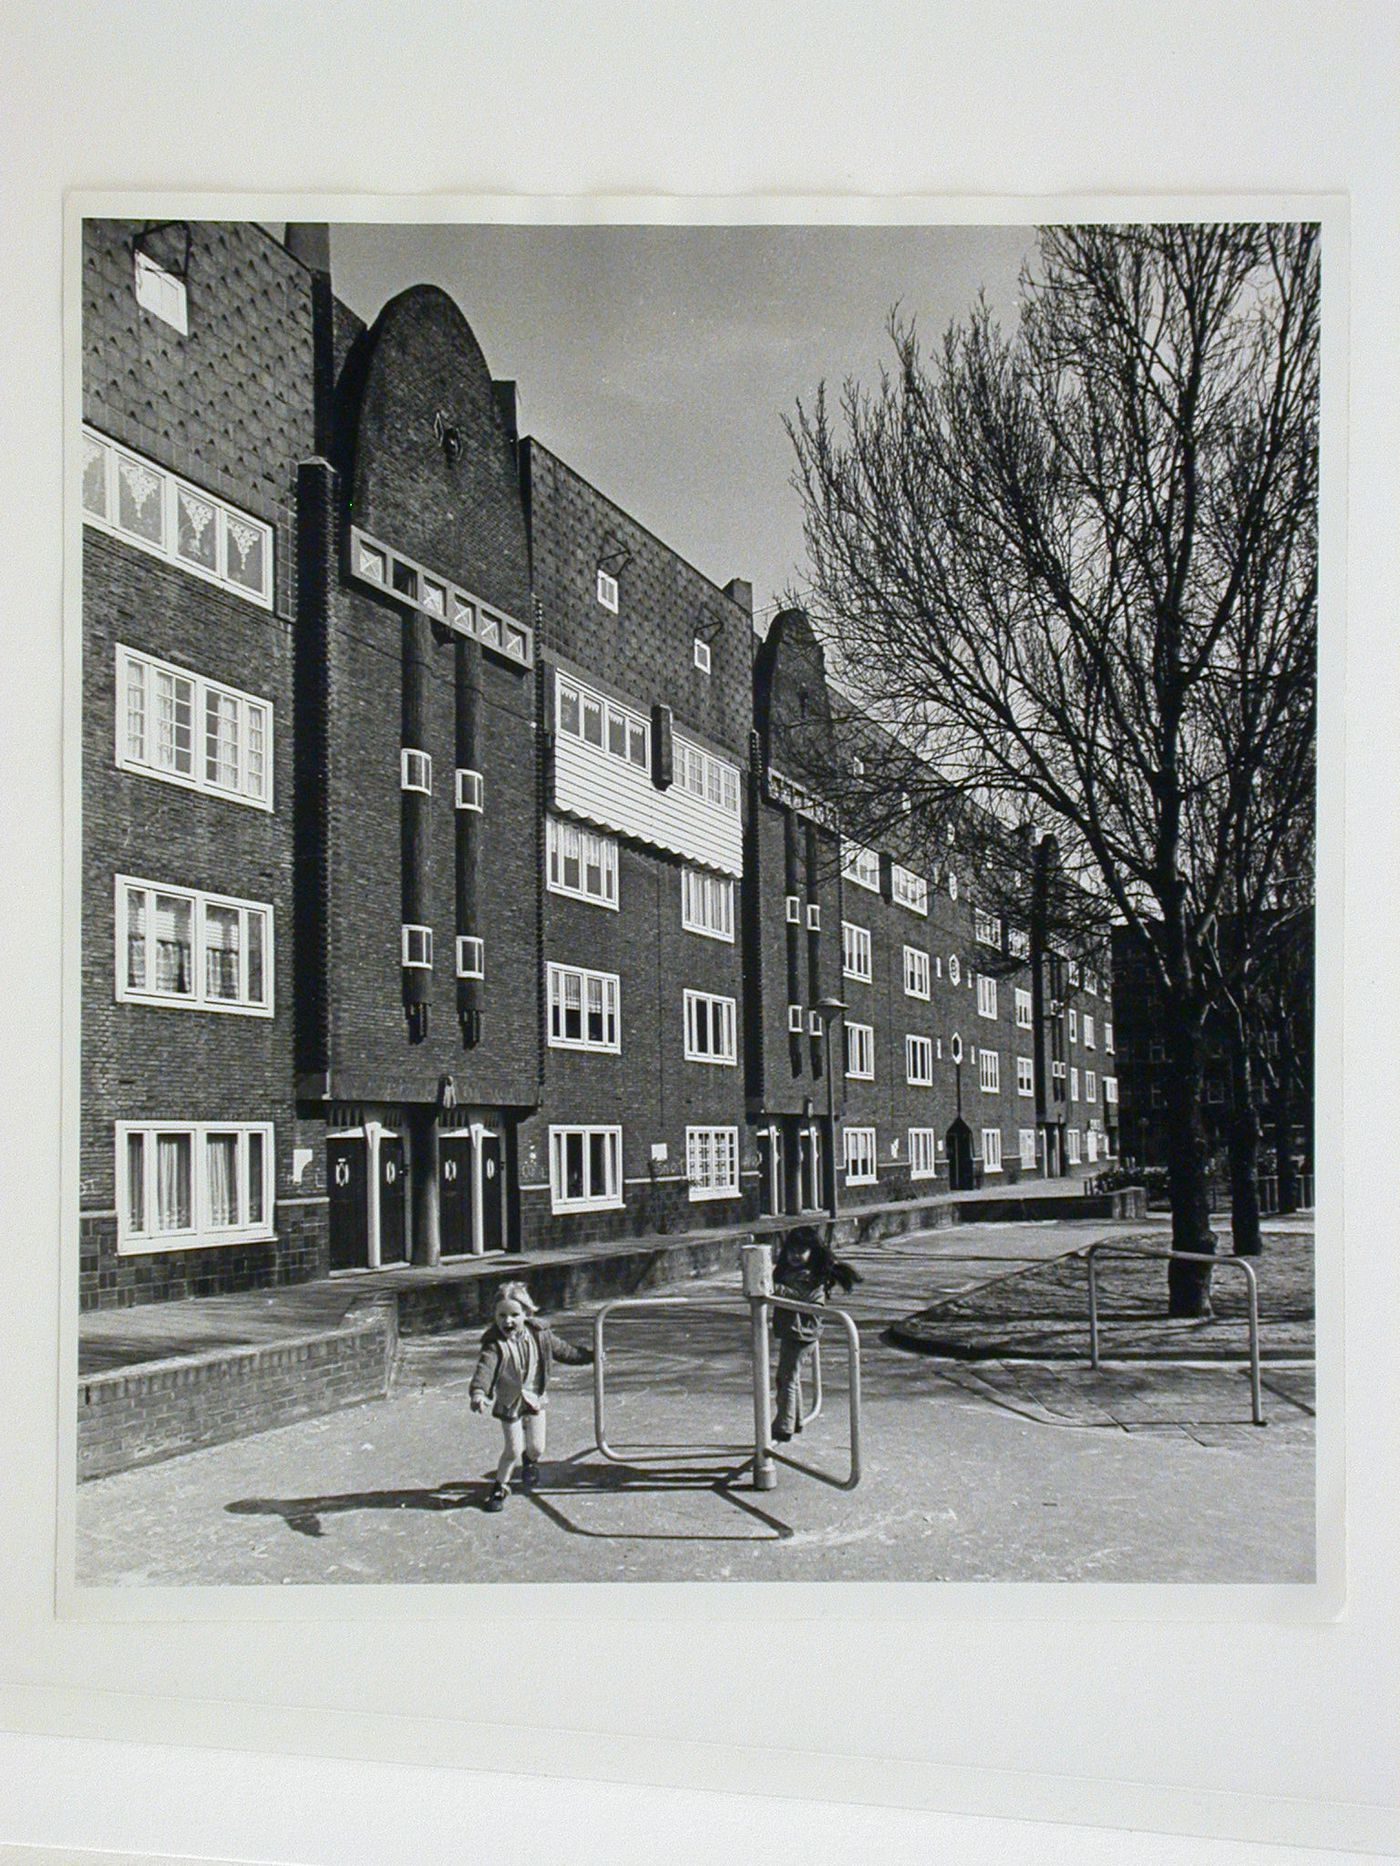 View of a façade of Block 1 with children in the foreground, Spaarndammerbuurt, Amsterdam, Netherlands